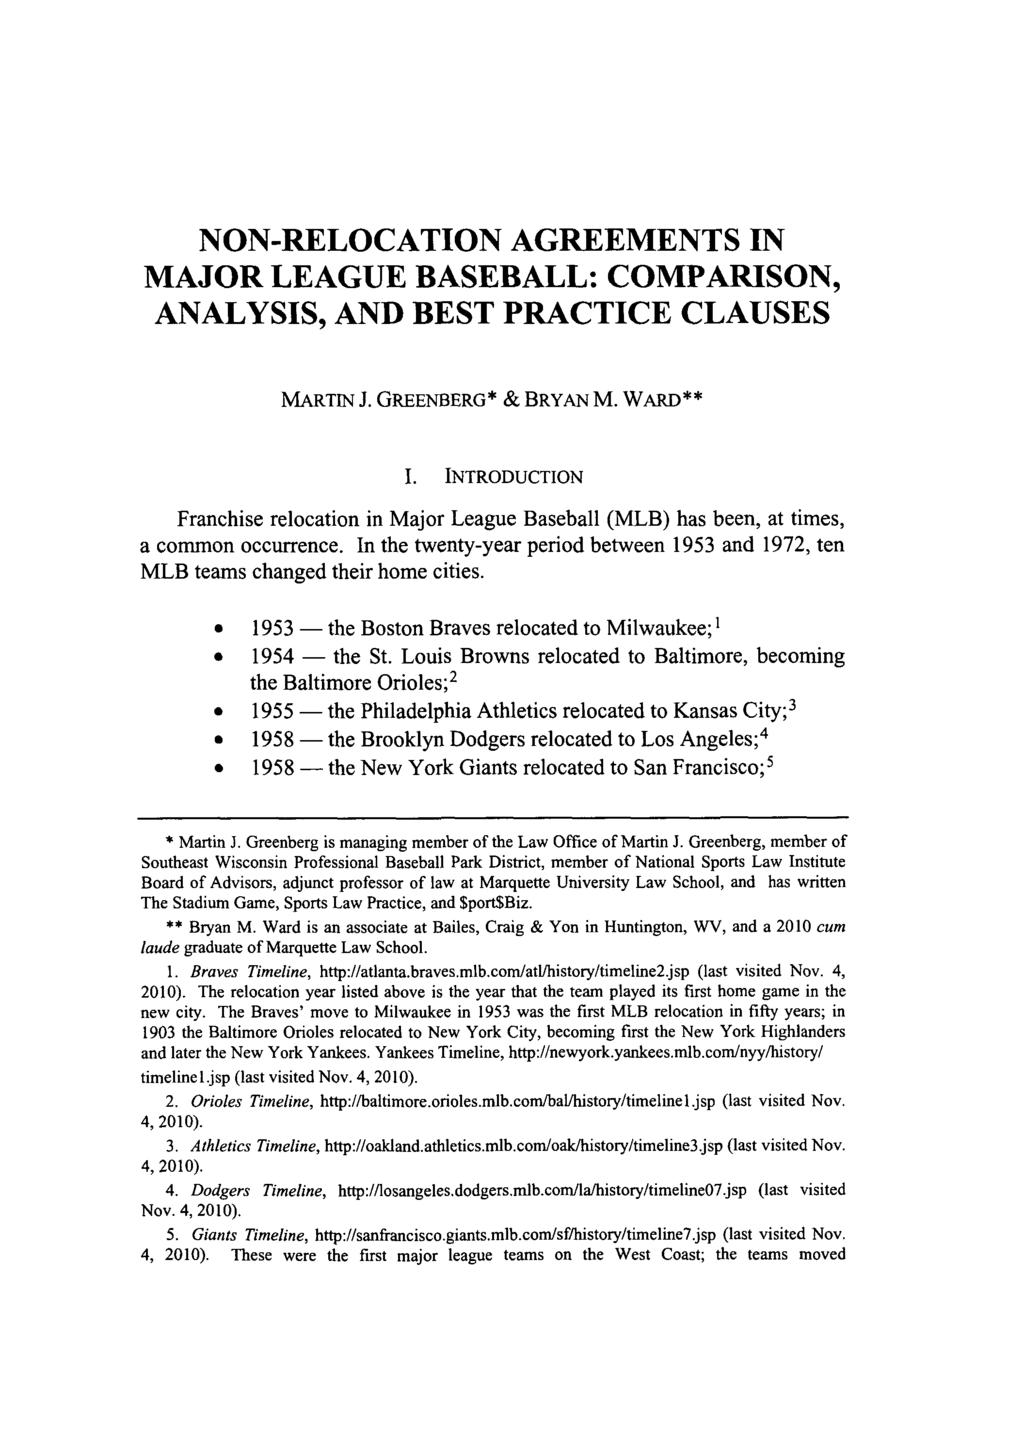 NON-RELOCATION AGREEMENTS IN MAJOR LEAGUE BASEBALL: COMPARISON, ANALYSIS, AND BEST PRACTICE CLAUSES MARTIN J. GREENBERG* & BRYAN M. WARD* I.